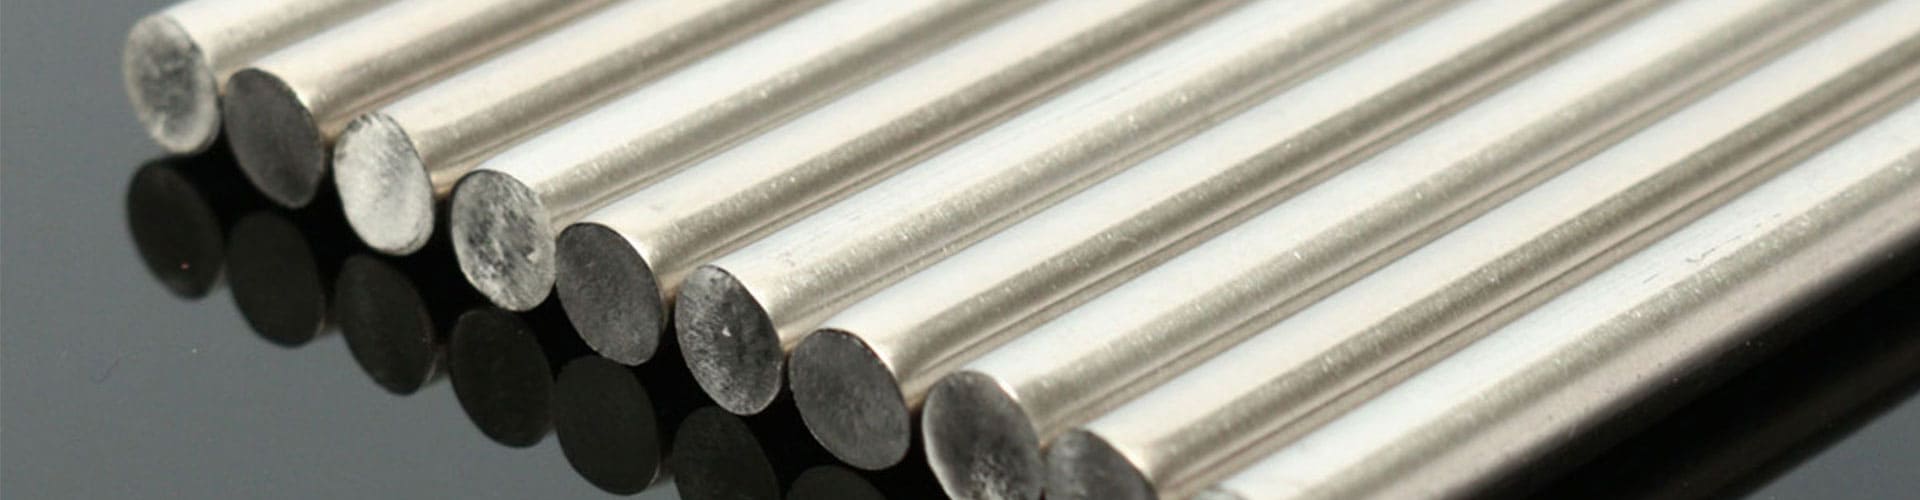 nickel-alloy-201-round-bars-rods-manufacturer-exporter-supplier-in-germany